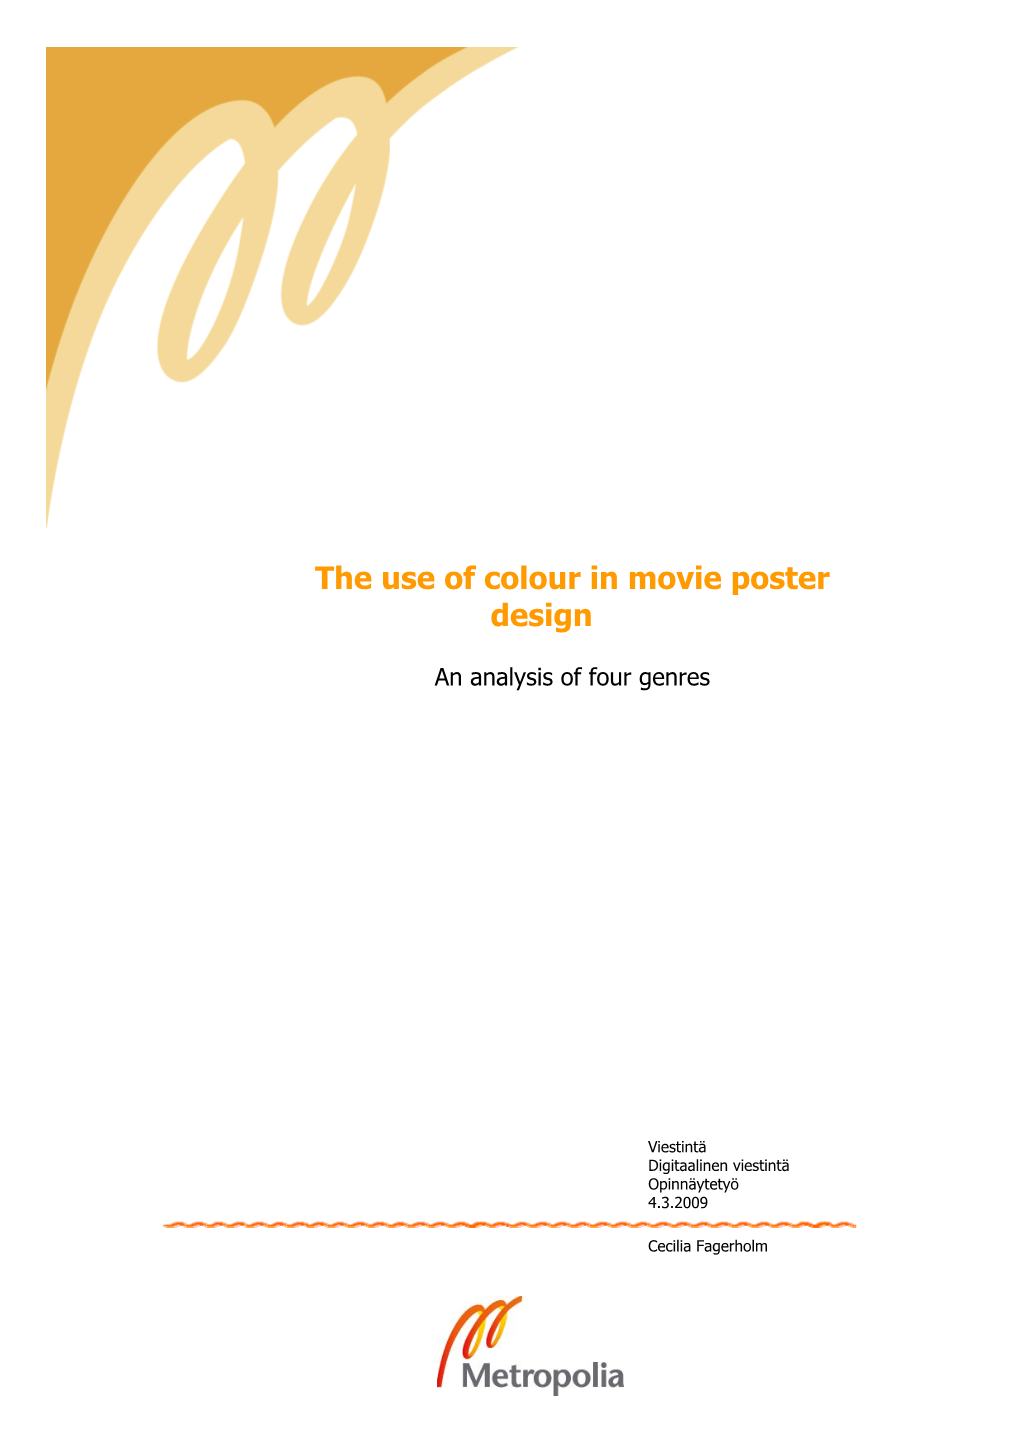 The Use of Colour in Movie Poster Design